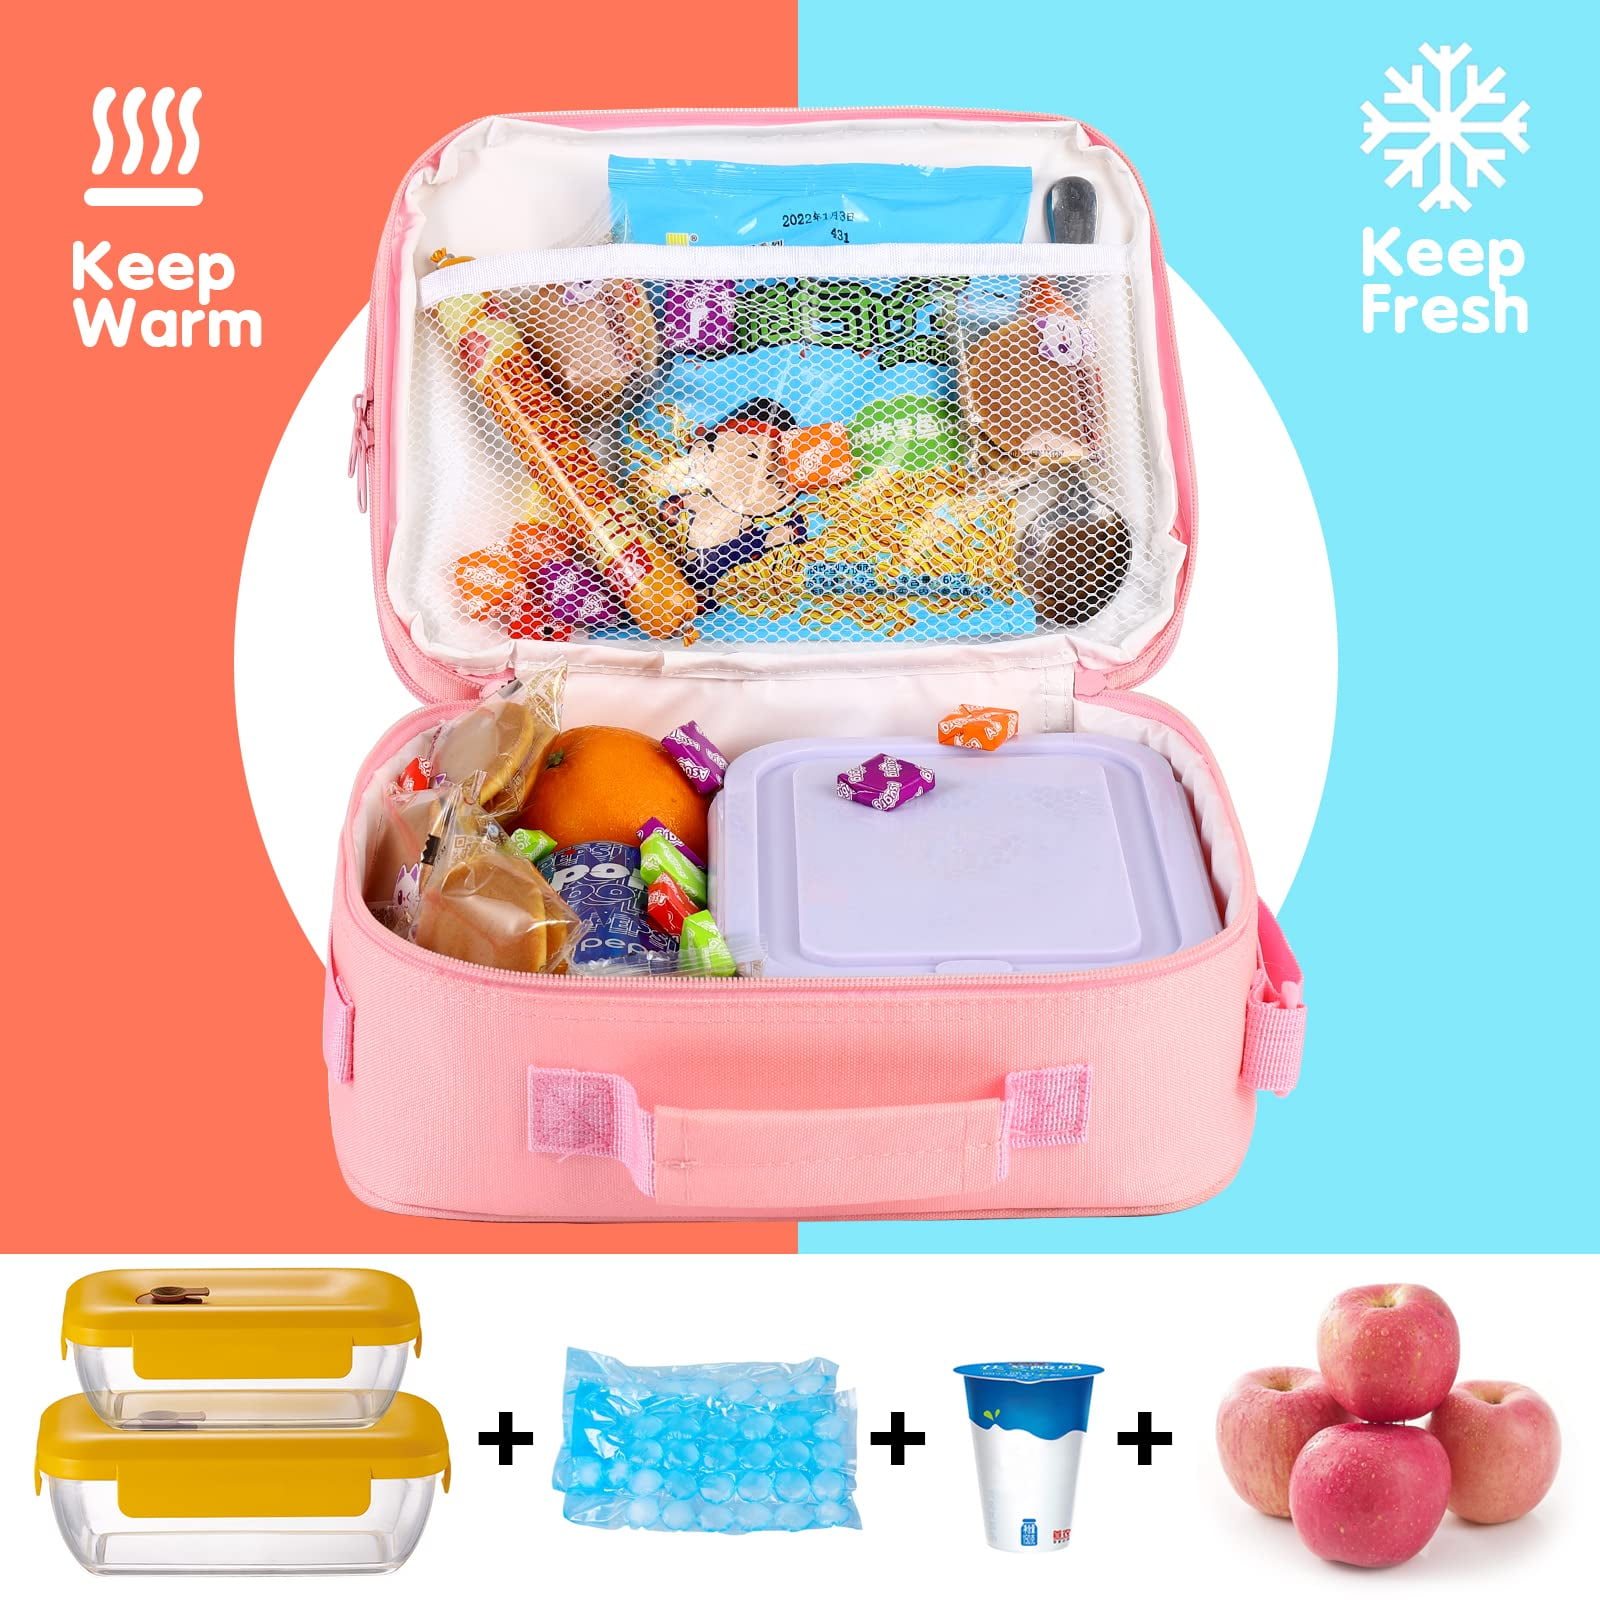 JoyLEME Pop Lunch Box for Kids Girls Insulated Lunch Boxes, Girls